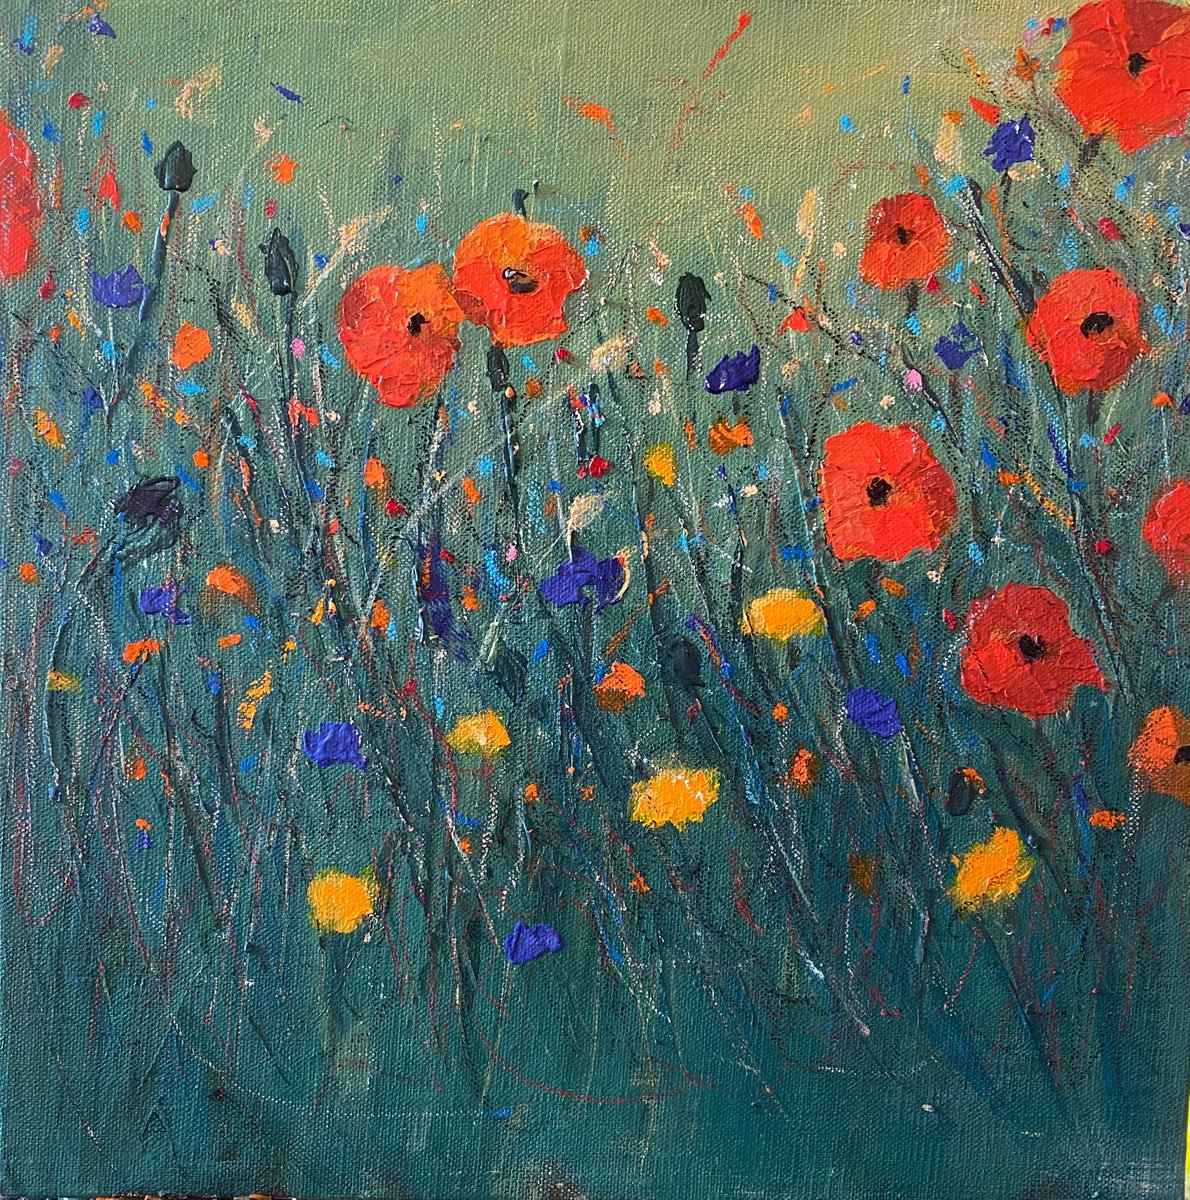 Poppies in the moonlight abstract by Clare Hoath